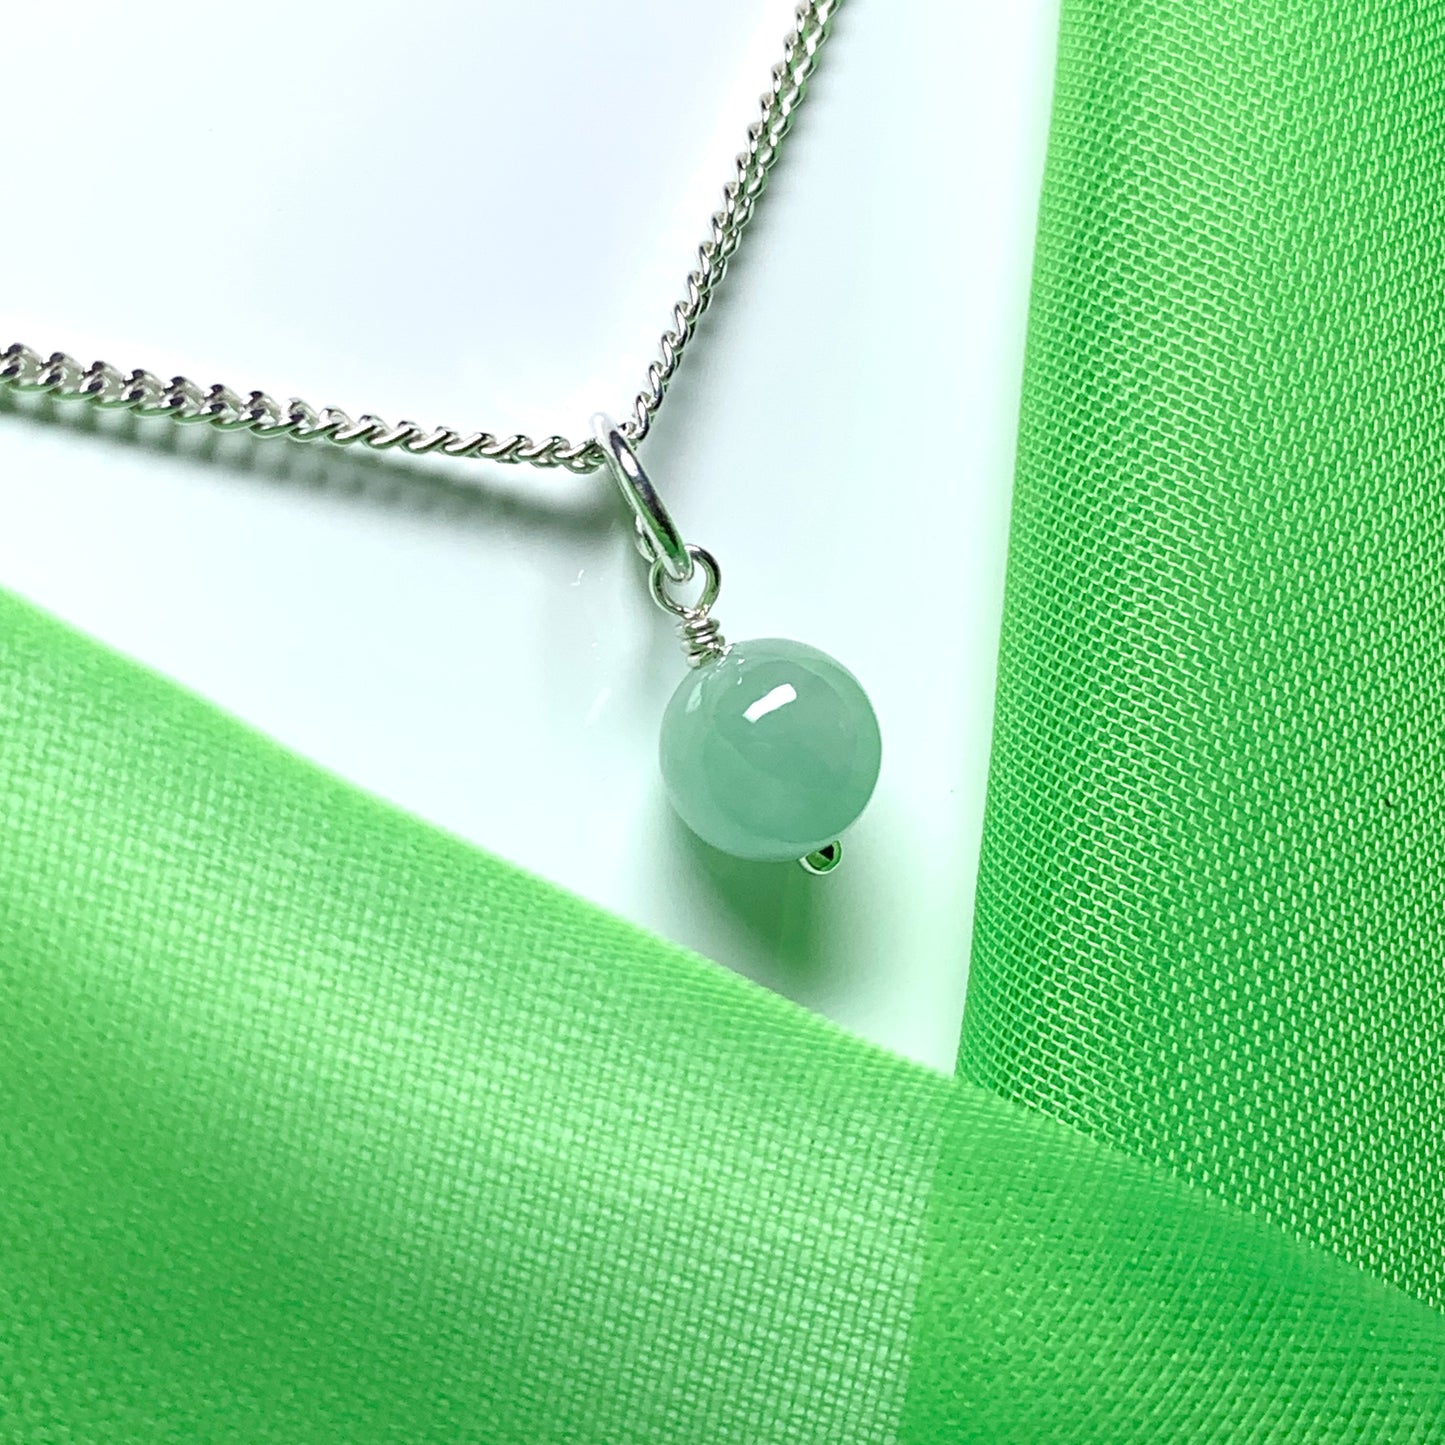 Real green jade necklace round ball shaped green pendant